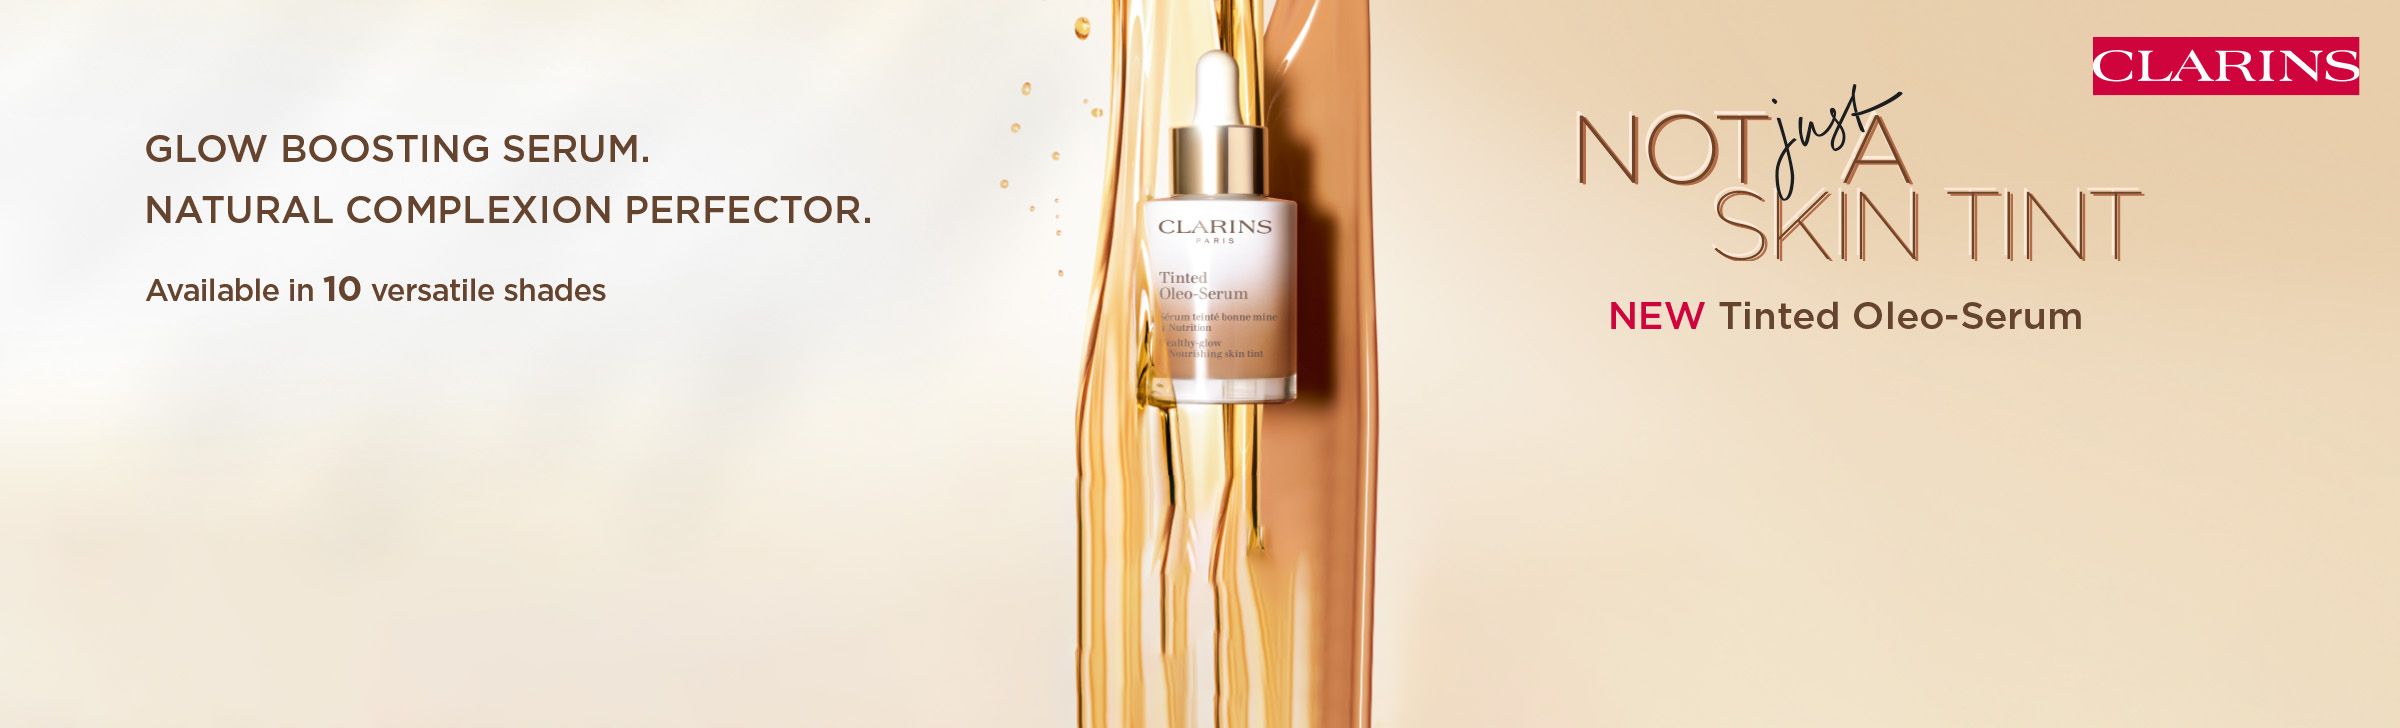 Clarins boosting serum product shot. Glow boosting serum. natural complextion perfector. available in 10 shades. not just a skin tint. New tinted olio-serum